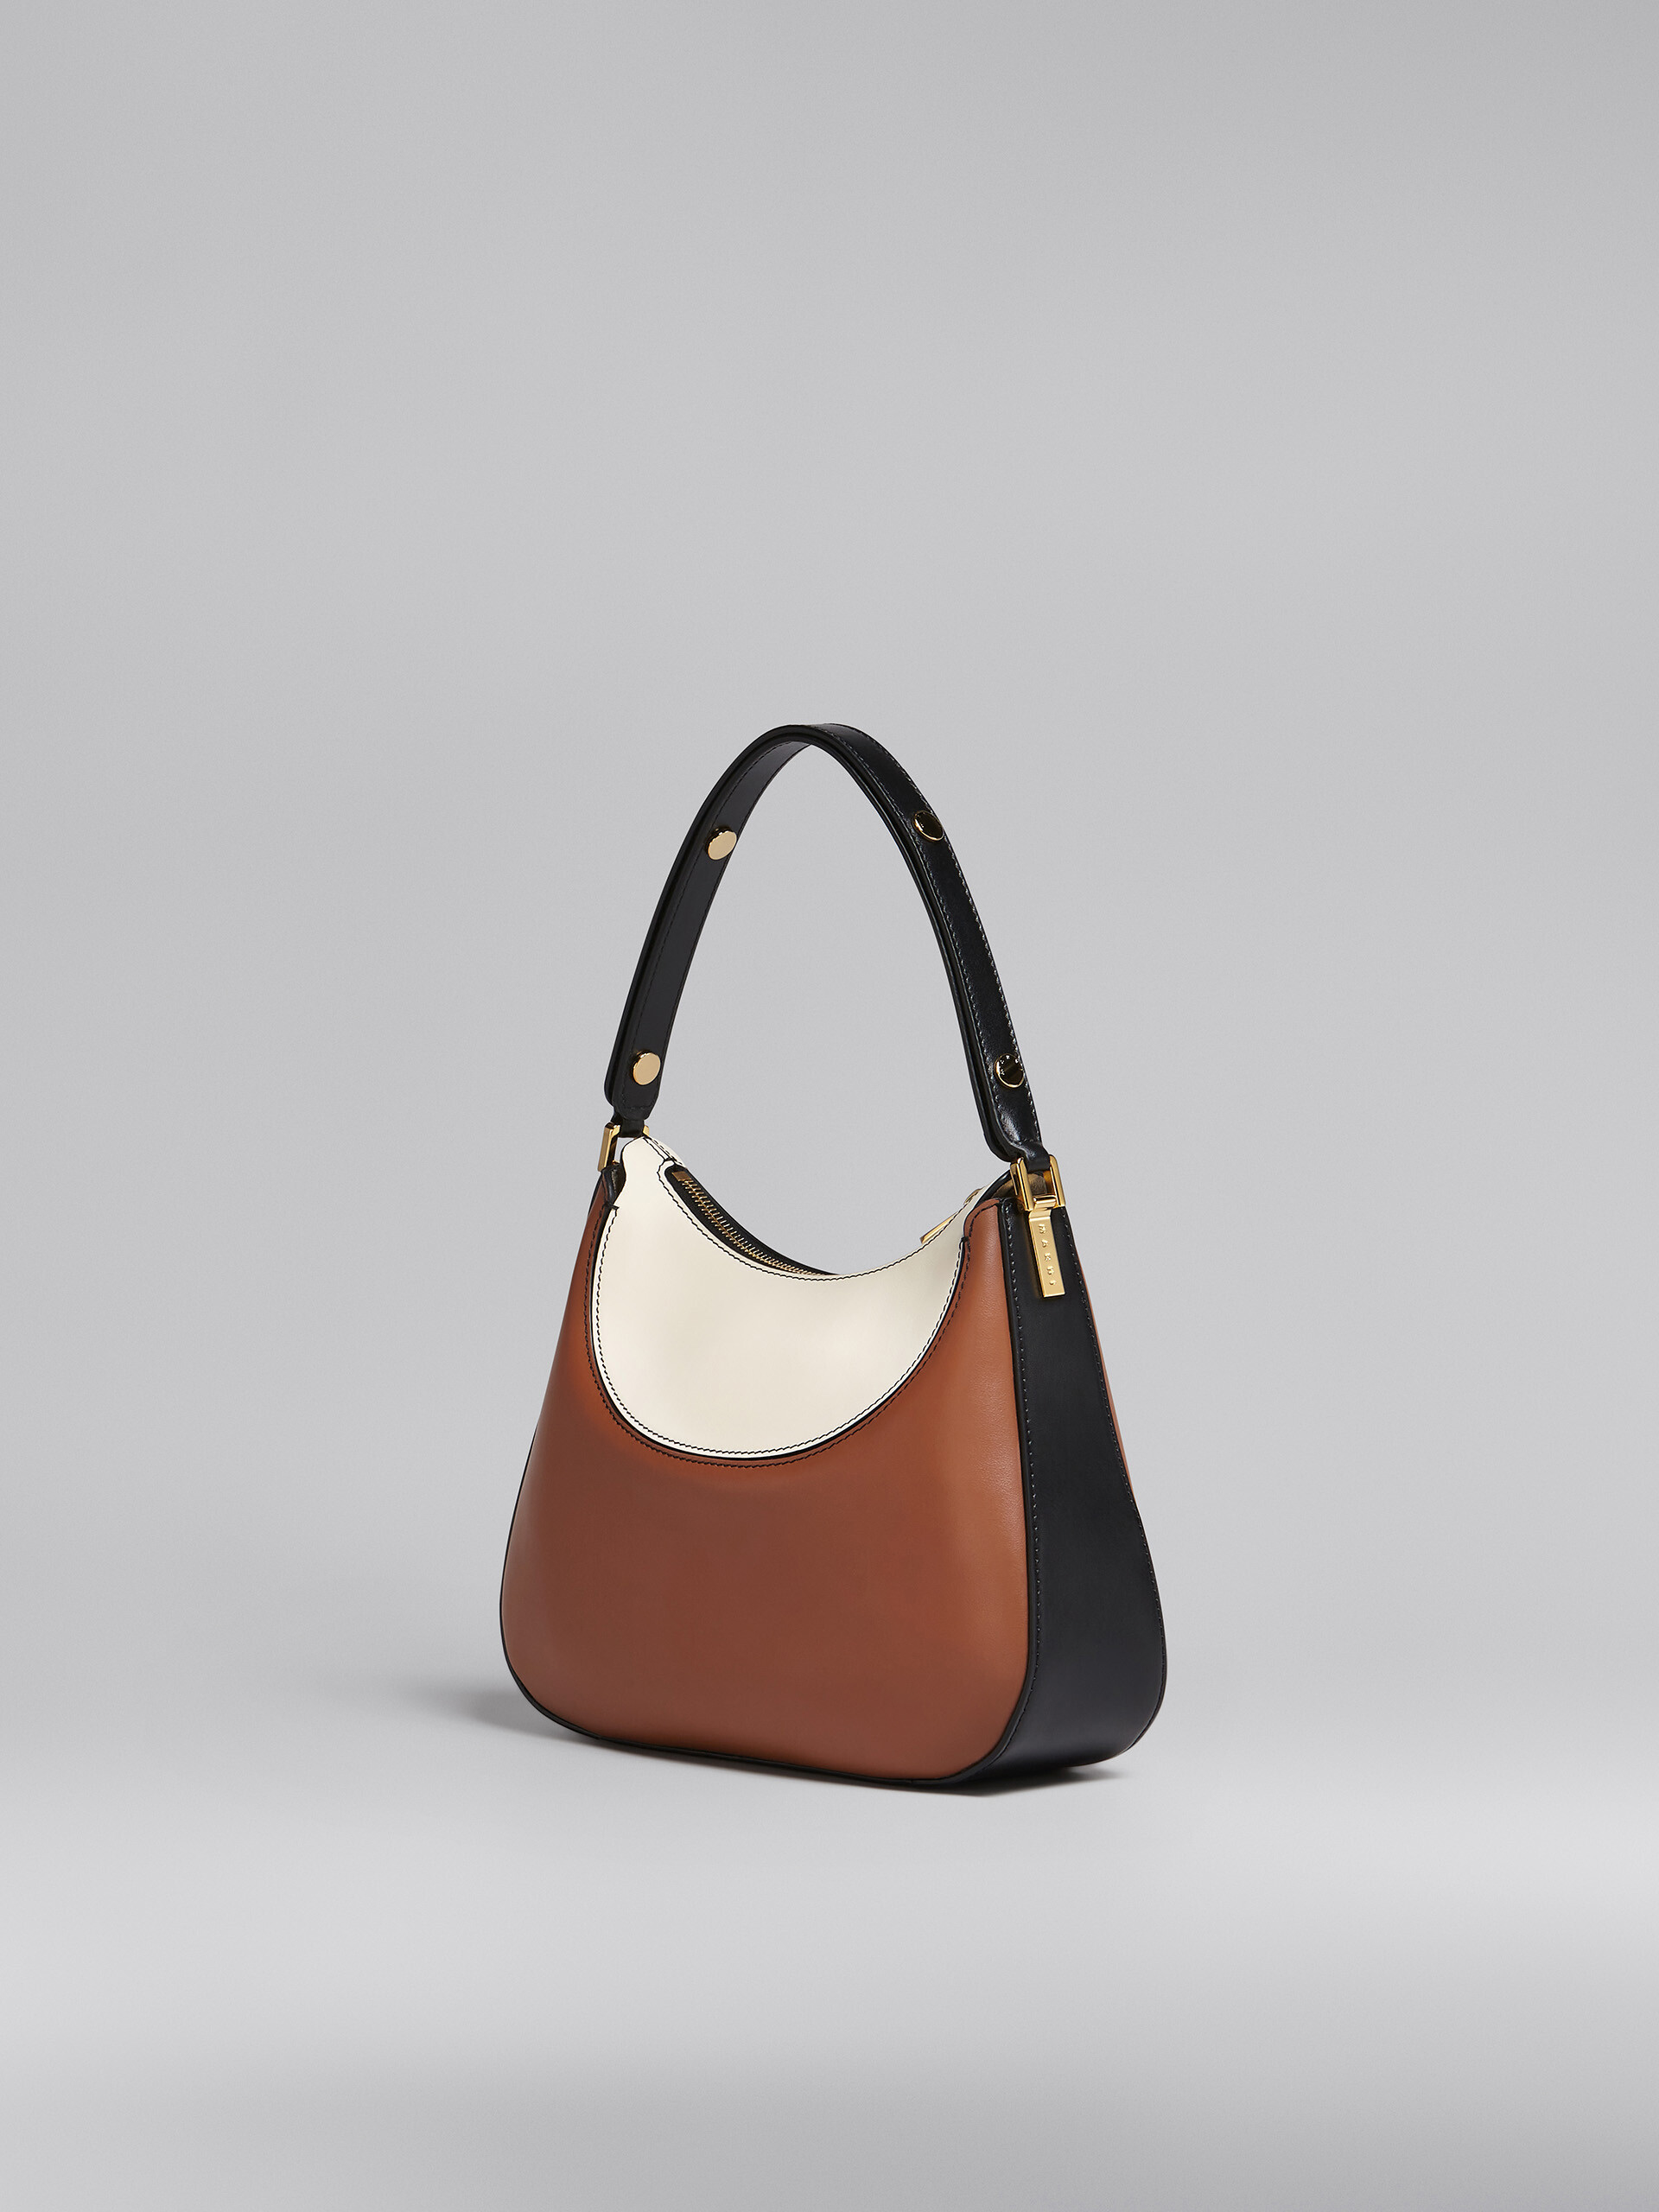 Milano small bag in brown black and white - Handbags - Image 3